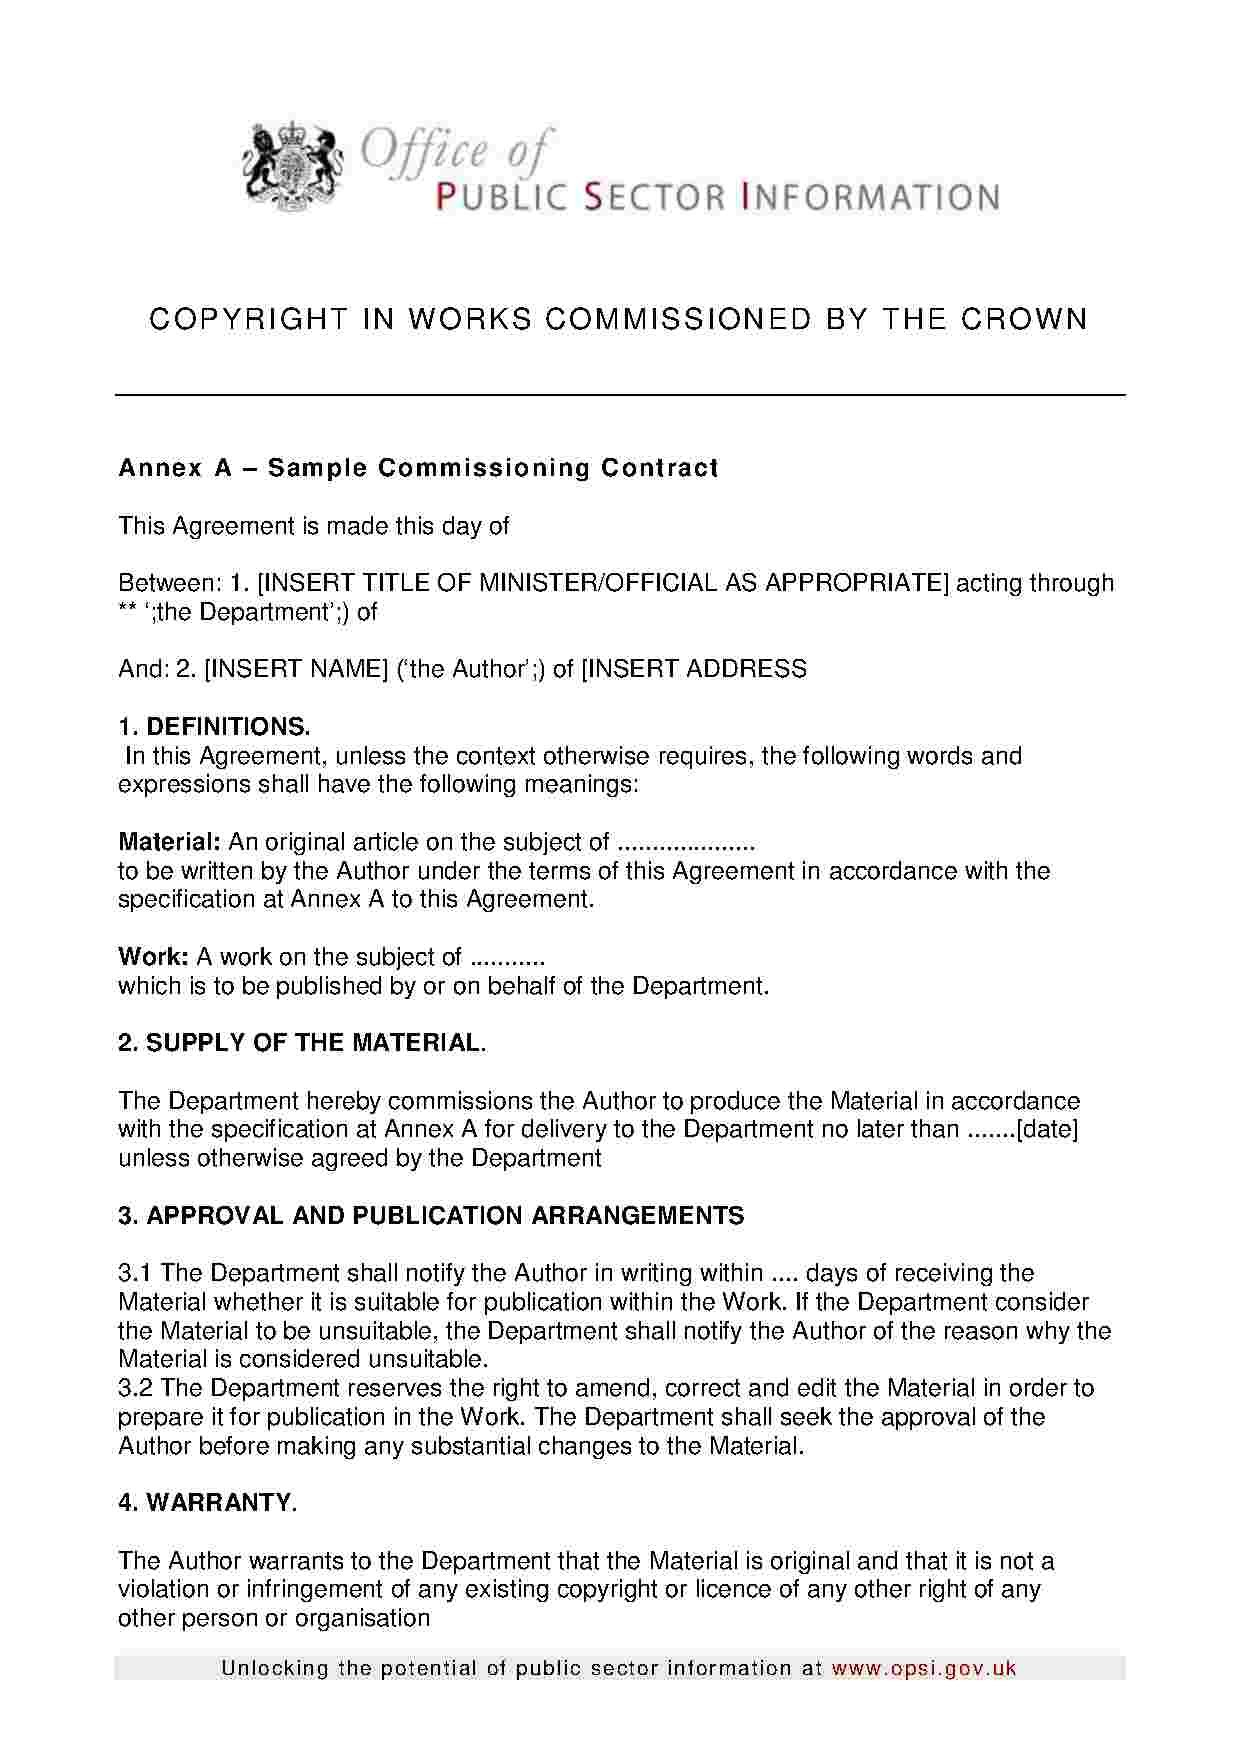 Download Copyright Assignment Style  Template For Free At intended for Copyright Assignment Agreement Template